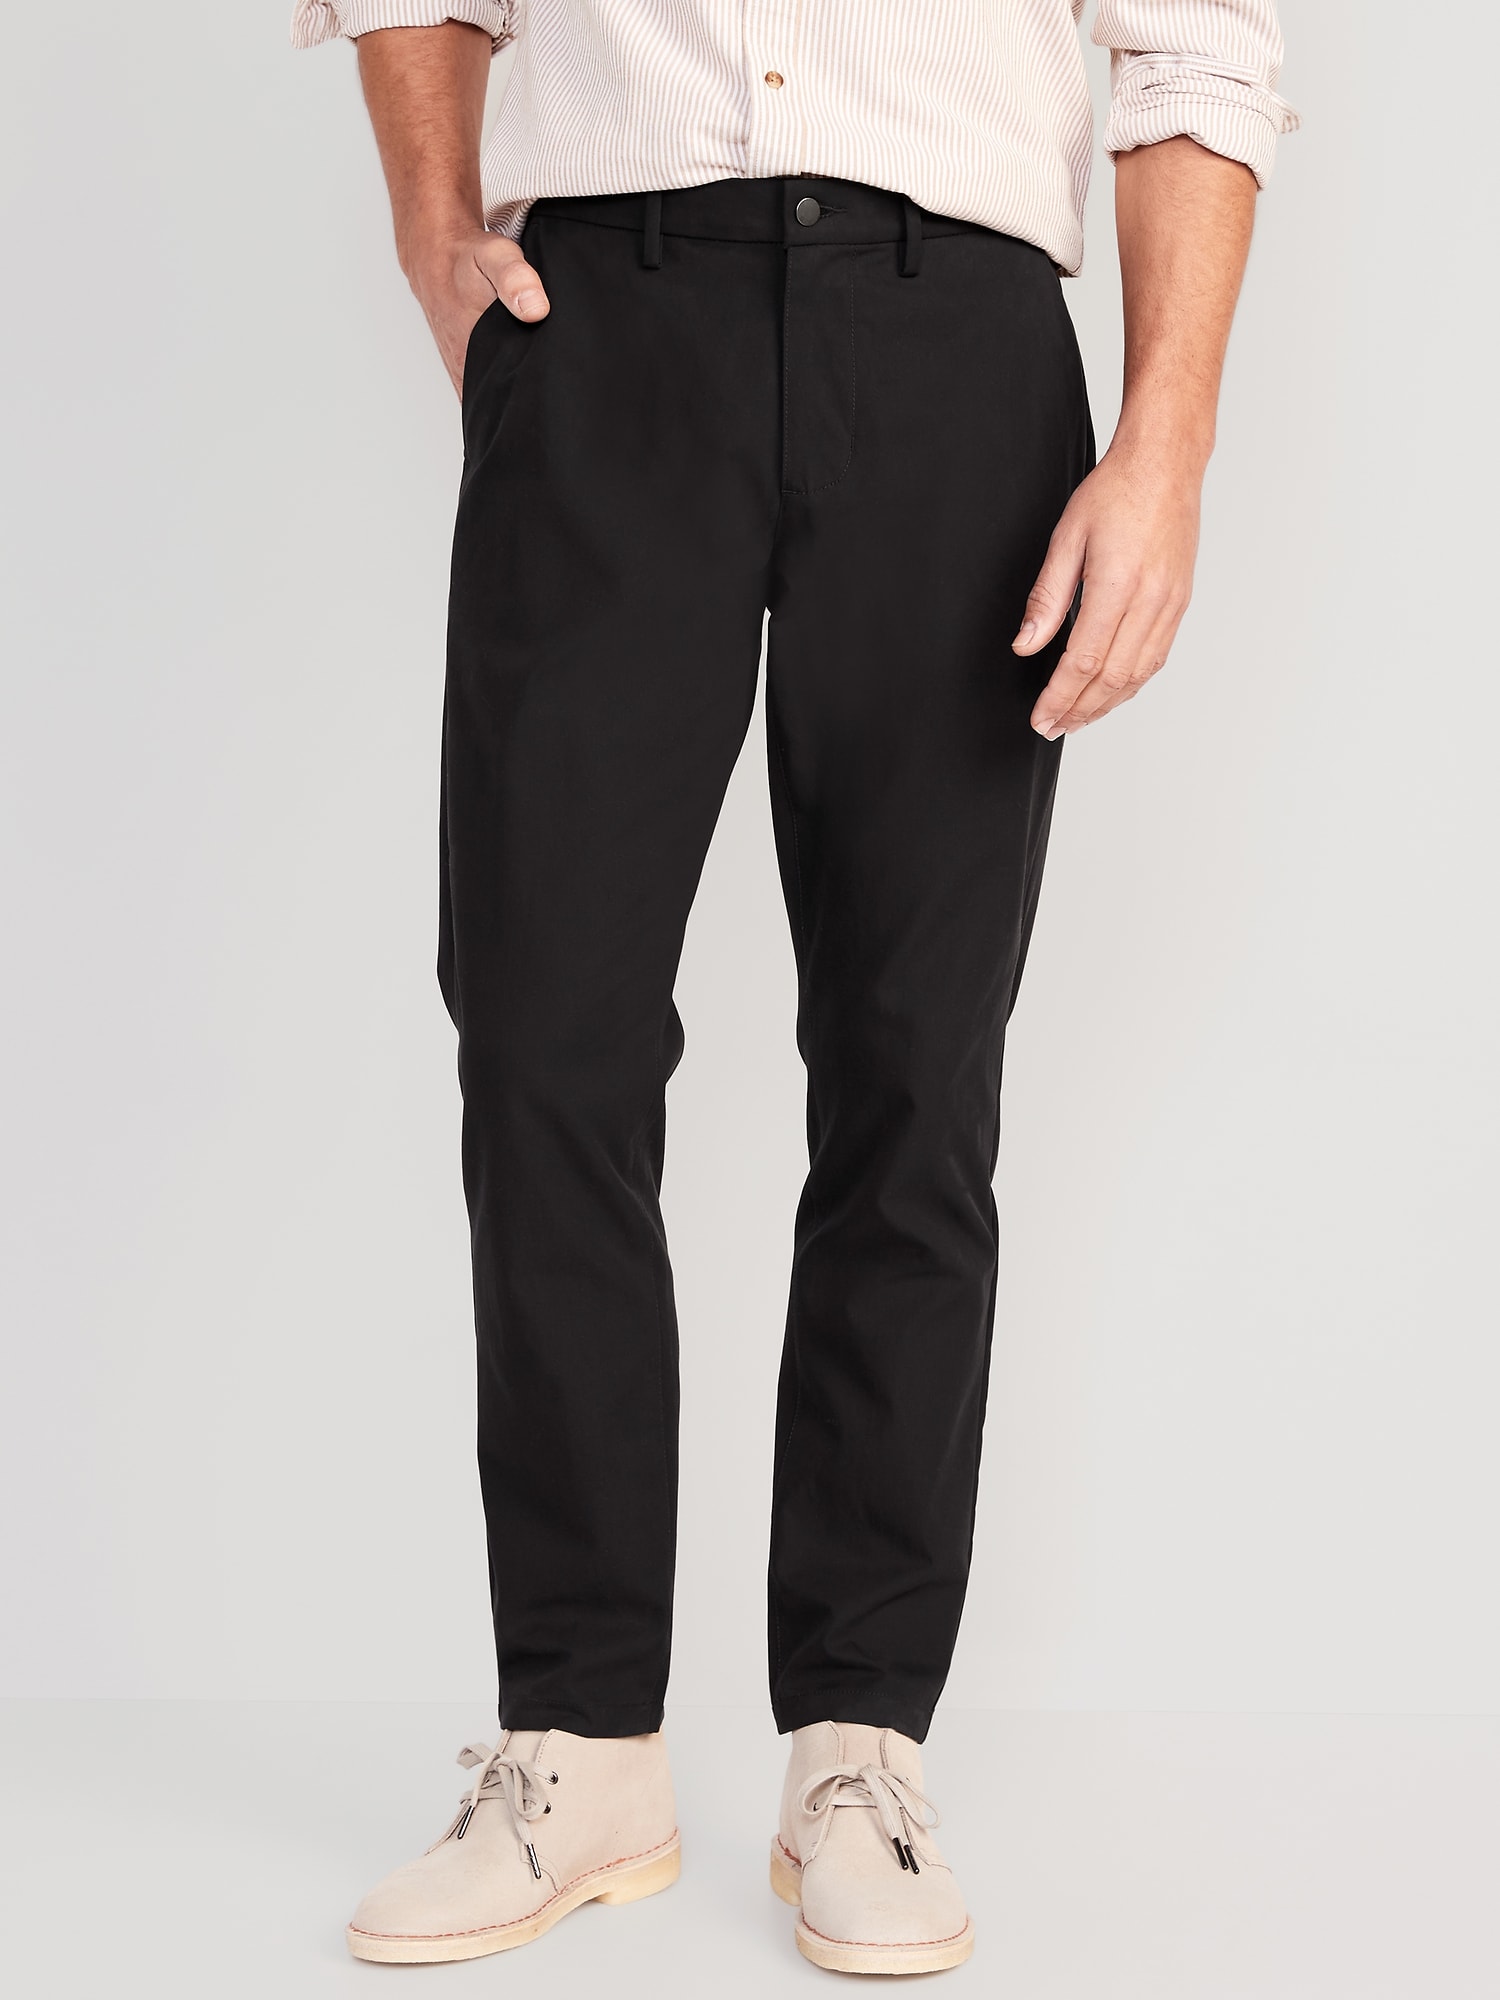 Athletic Ultimate Tech Built-In Flex Chino Pants